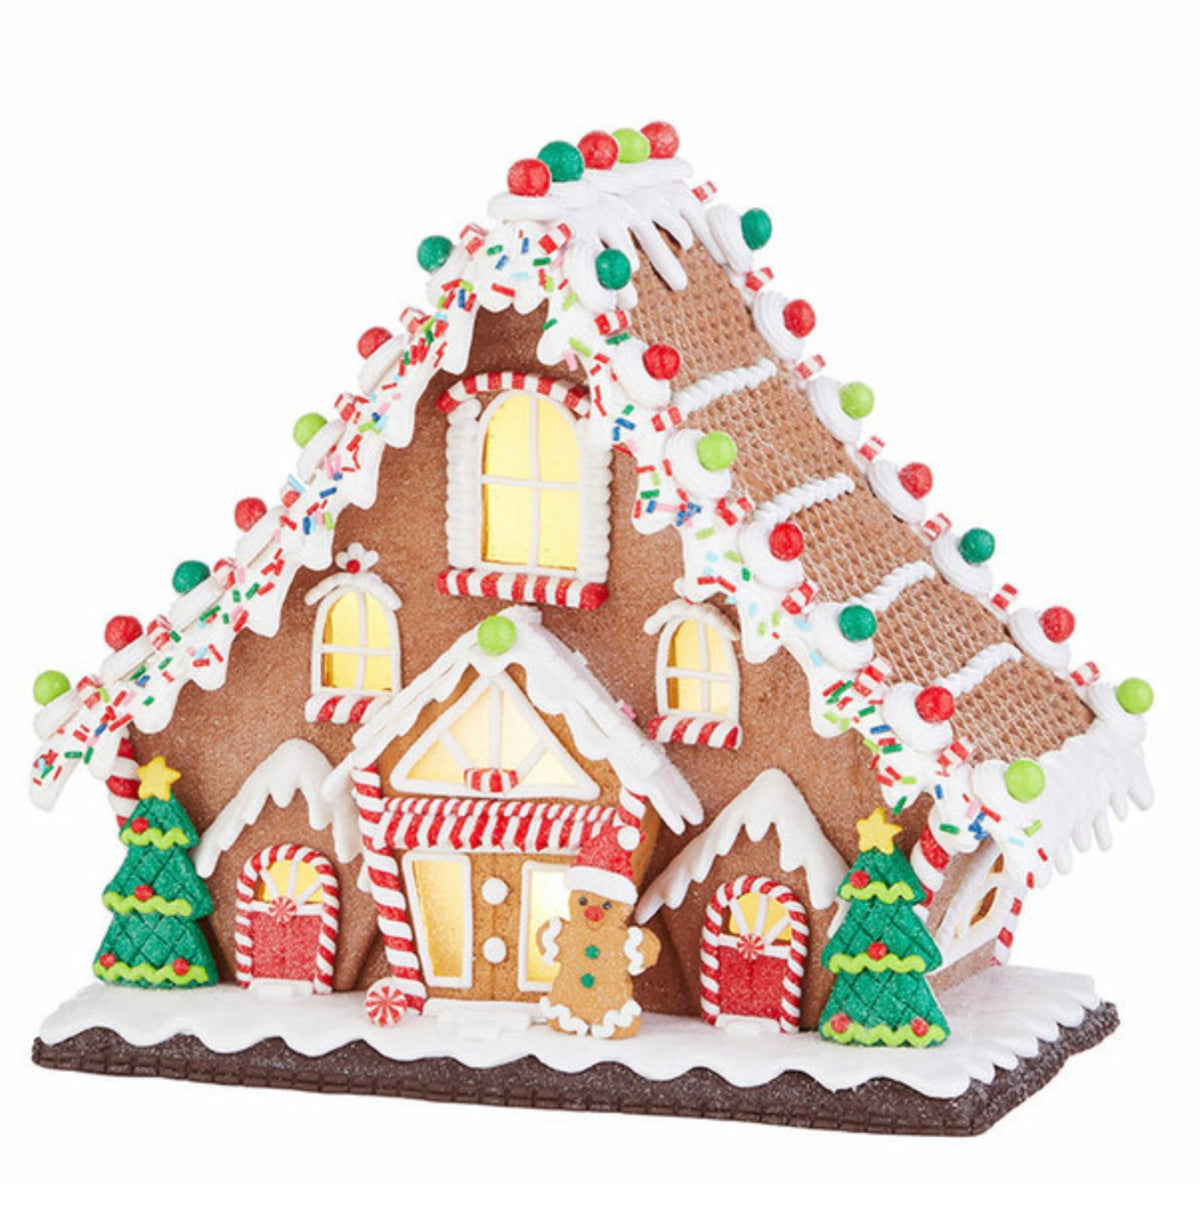 11.5” Lighted Gingerbread Lodge